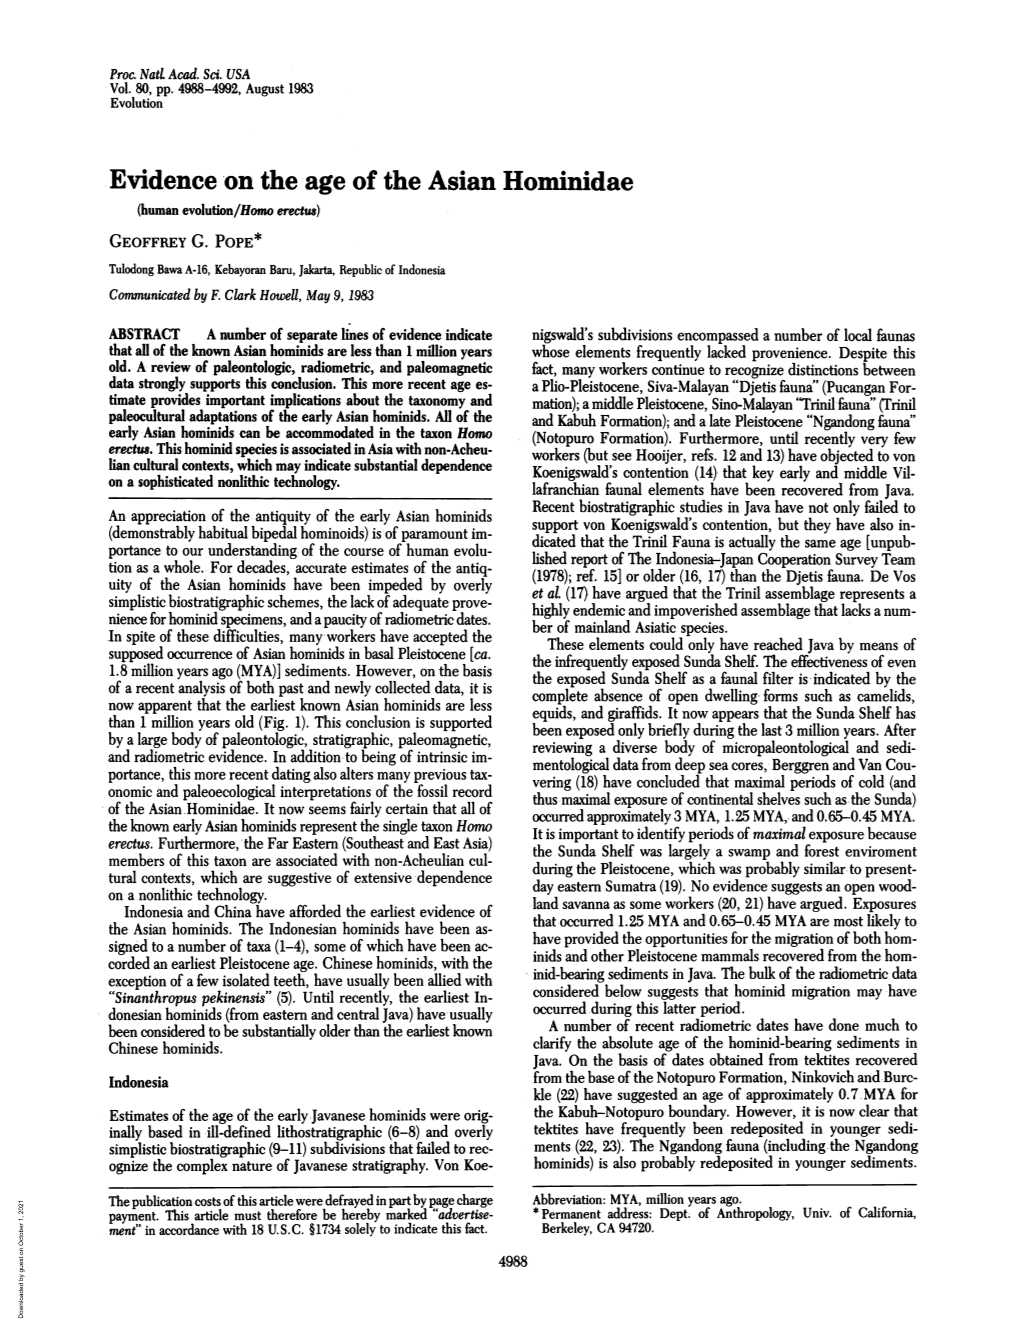 Ievidence on the Age of the Asian Hominidae (Human Evolution/Homo Erectus) GEOFFREY G